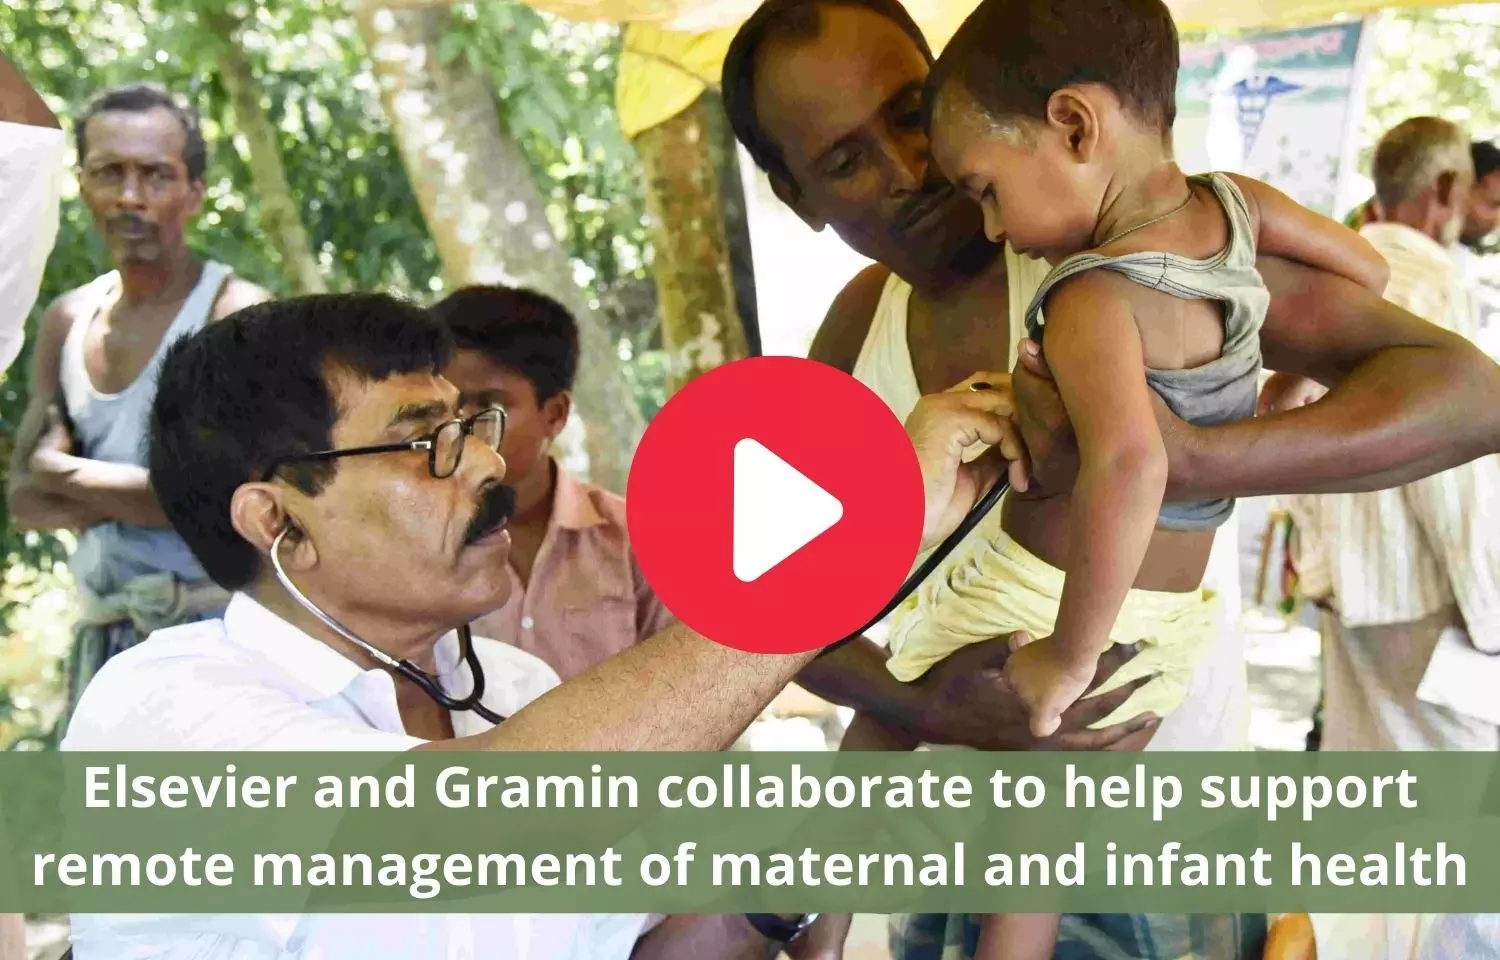 Elsevier, Gramin ink pact to help support remote management of infant, maternal health